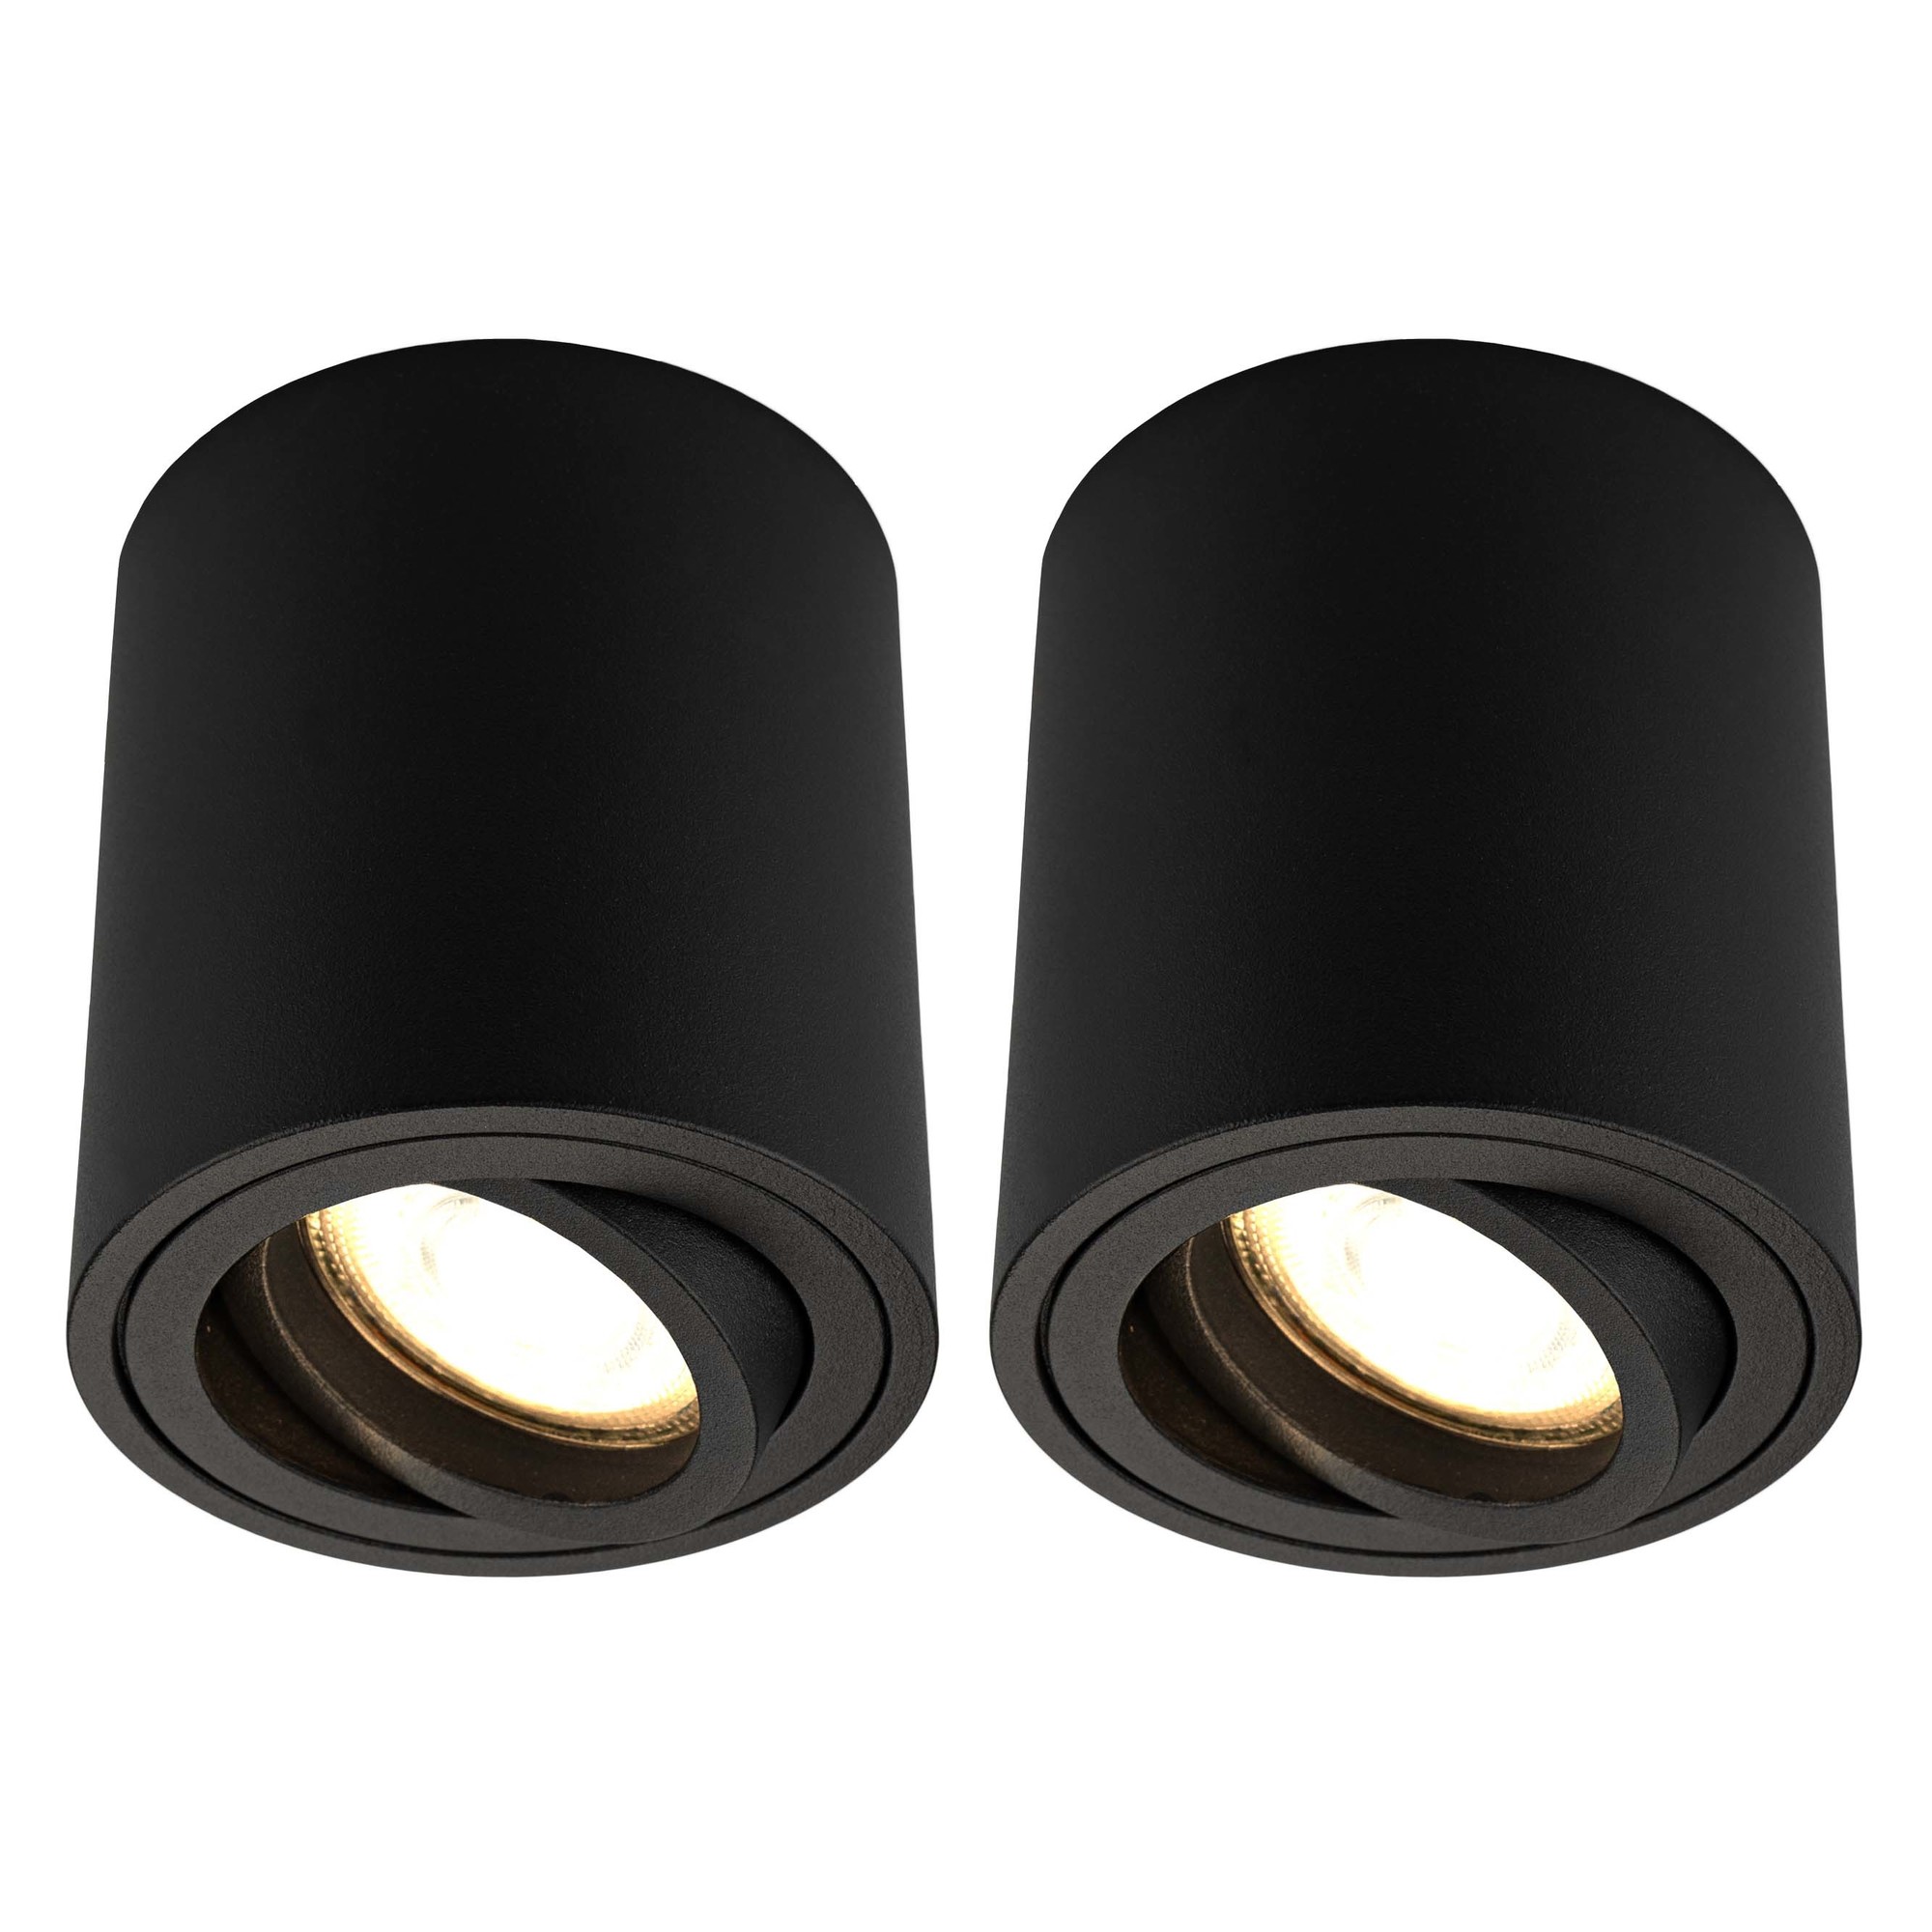 Spot LED Dimmable - Rond - Noir - 5W - 2700K - Inclinable - Lampesonline